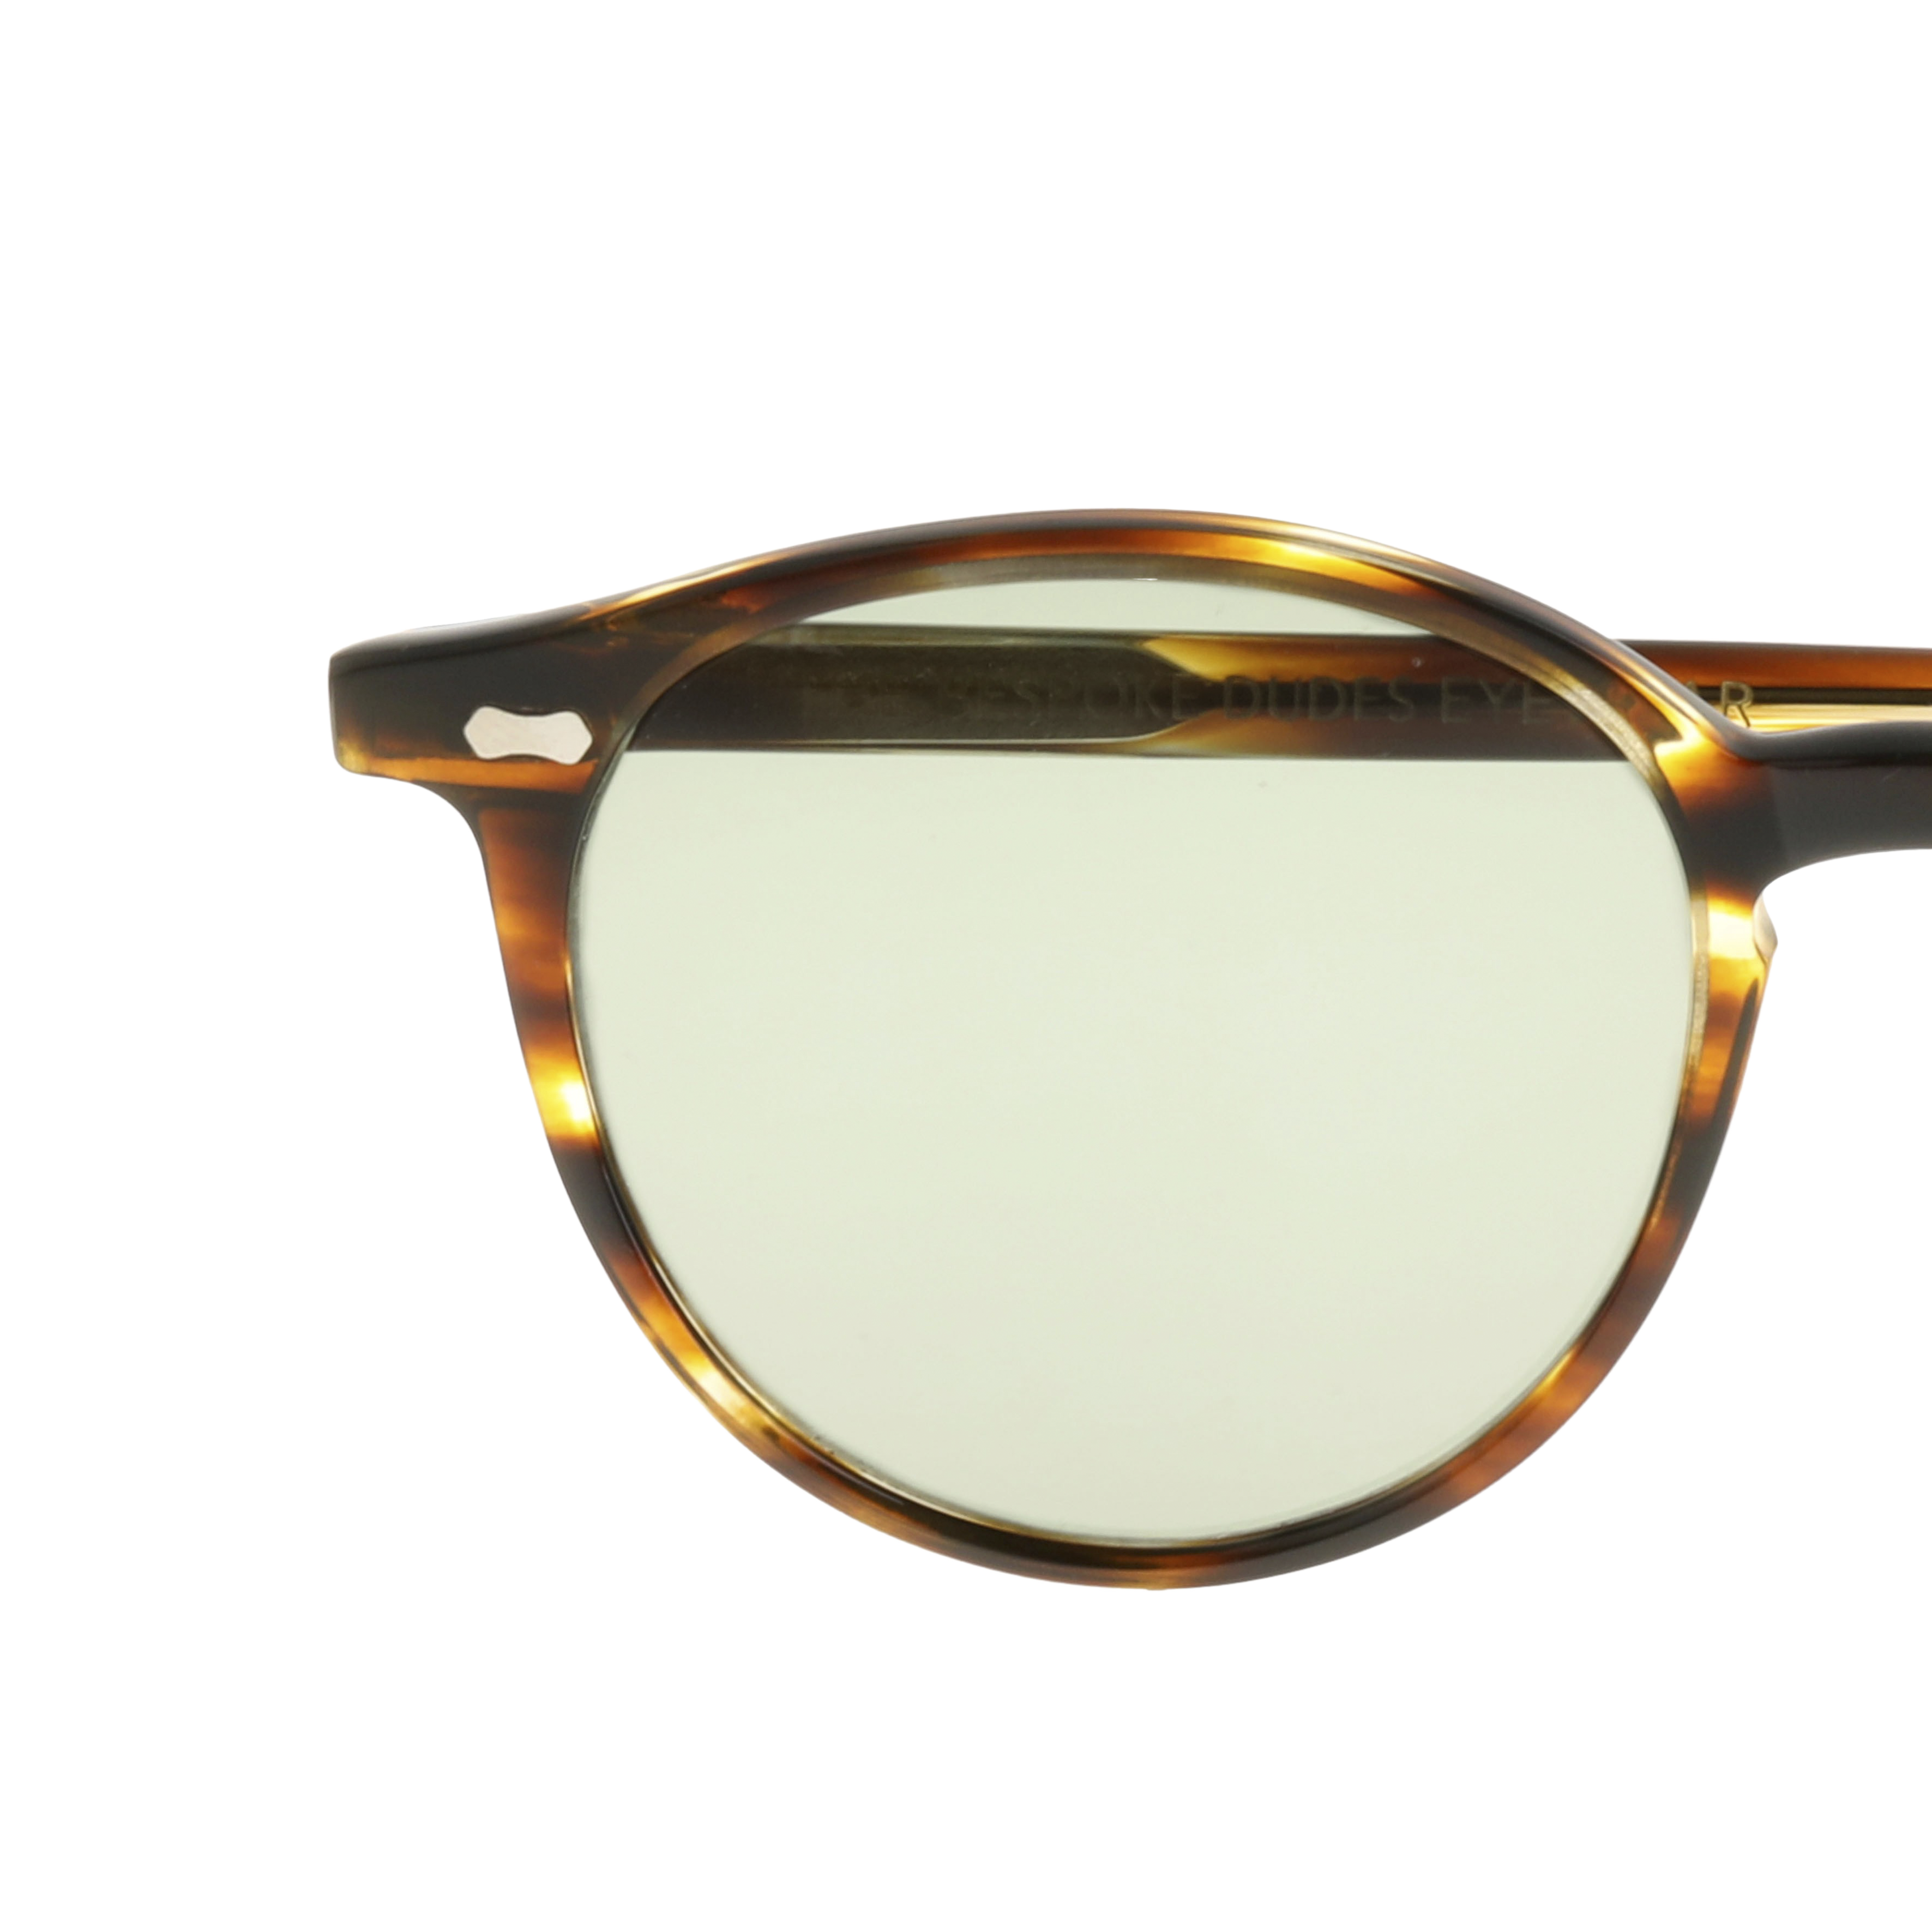 A handmade panto-shaped pair of Cran Light Havana sunglasses by The Bespoke Dudes with a tortoise frame and green lenses.